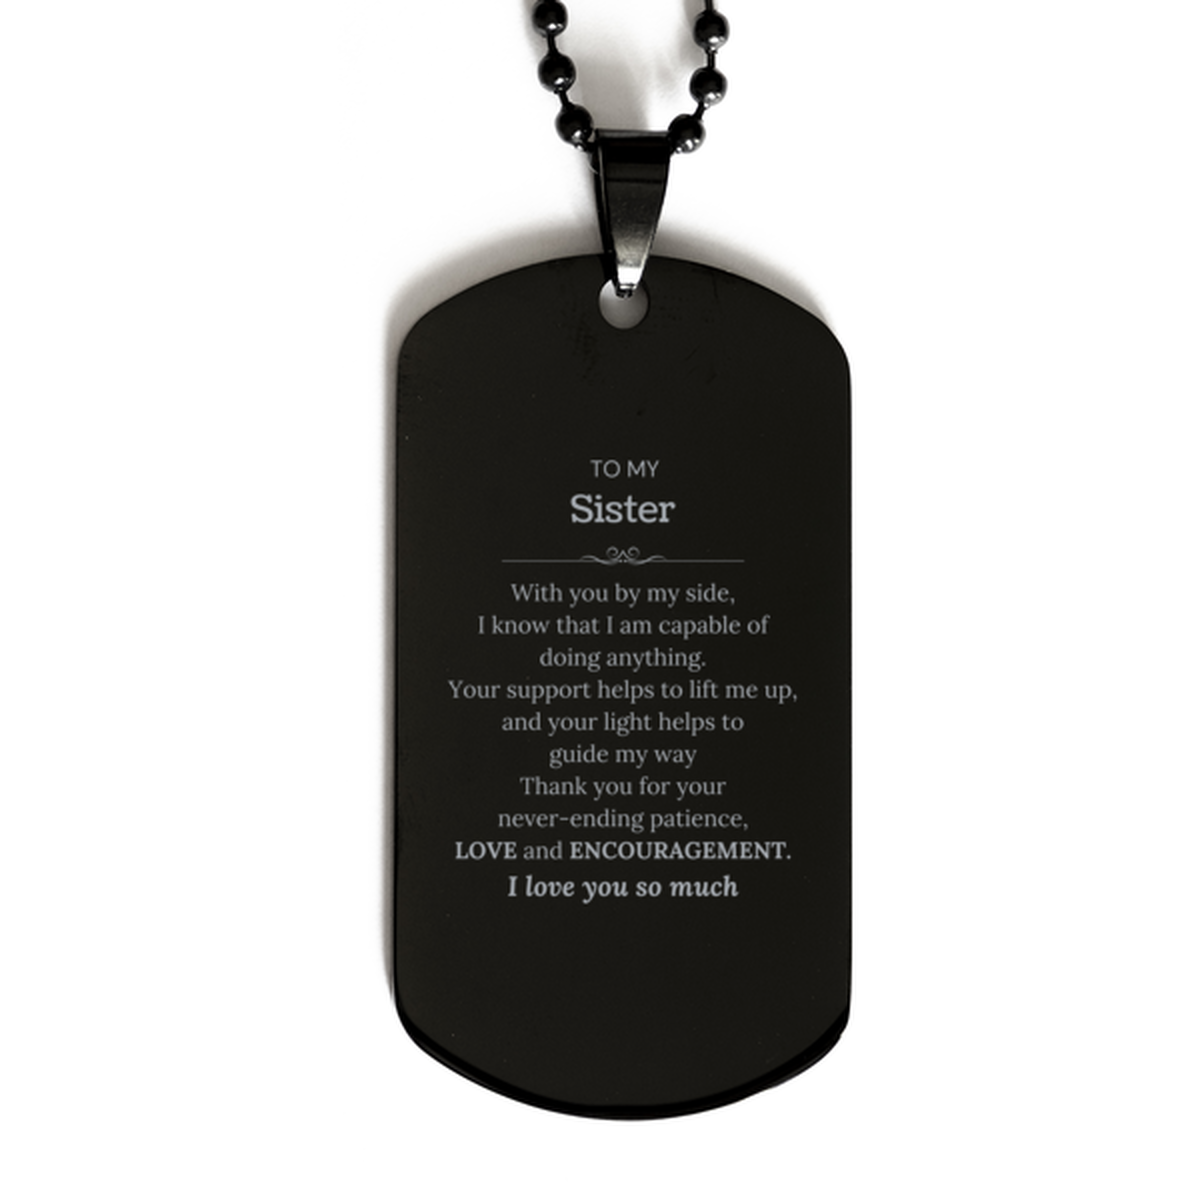 Appreciation Sister Black Dog Tag Gifts, To My Sister Birthday Christmas Wedding Keepsake Gifts for Sister With you by my side, I know that I am capable of doing anything. I love you so much